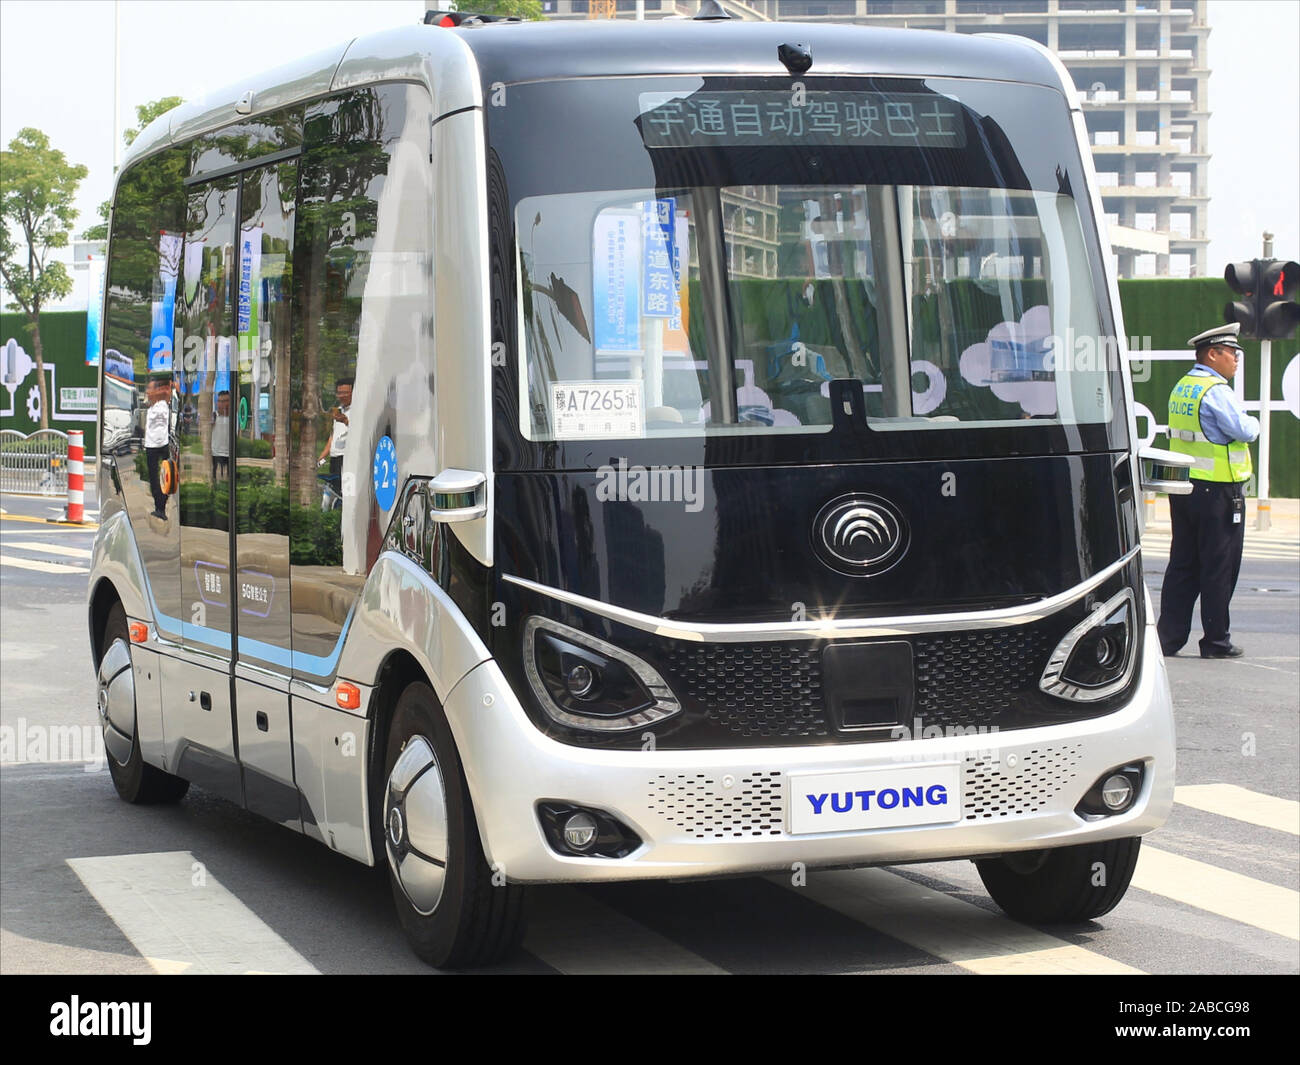 A self-driving car based on 5G technology and produced by Yutong, a Chinese manufacturer of commercial vehicles, especially electric buses, is tested Stock Photo